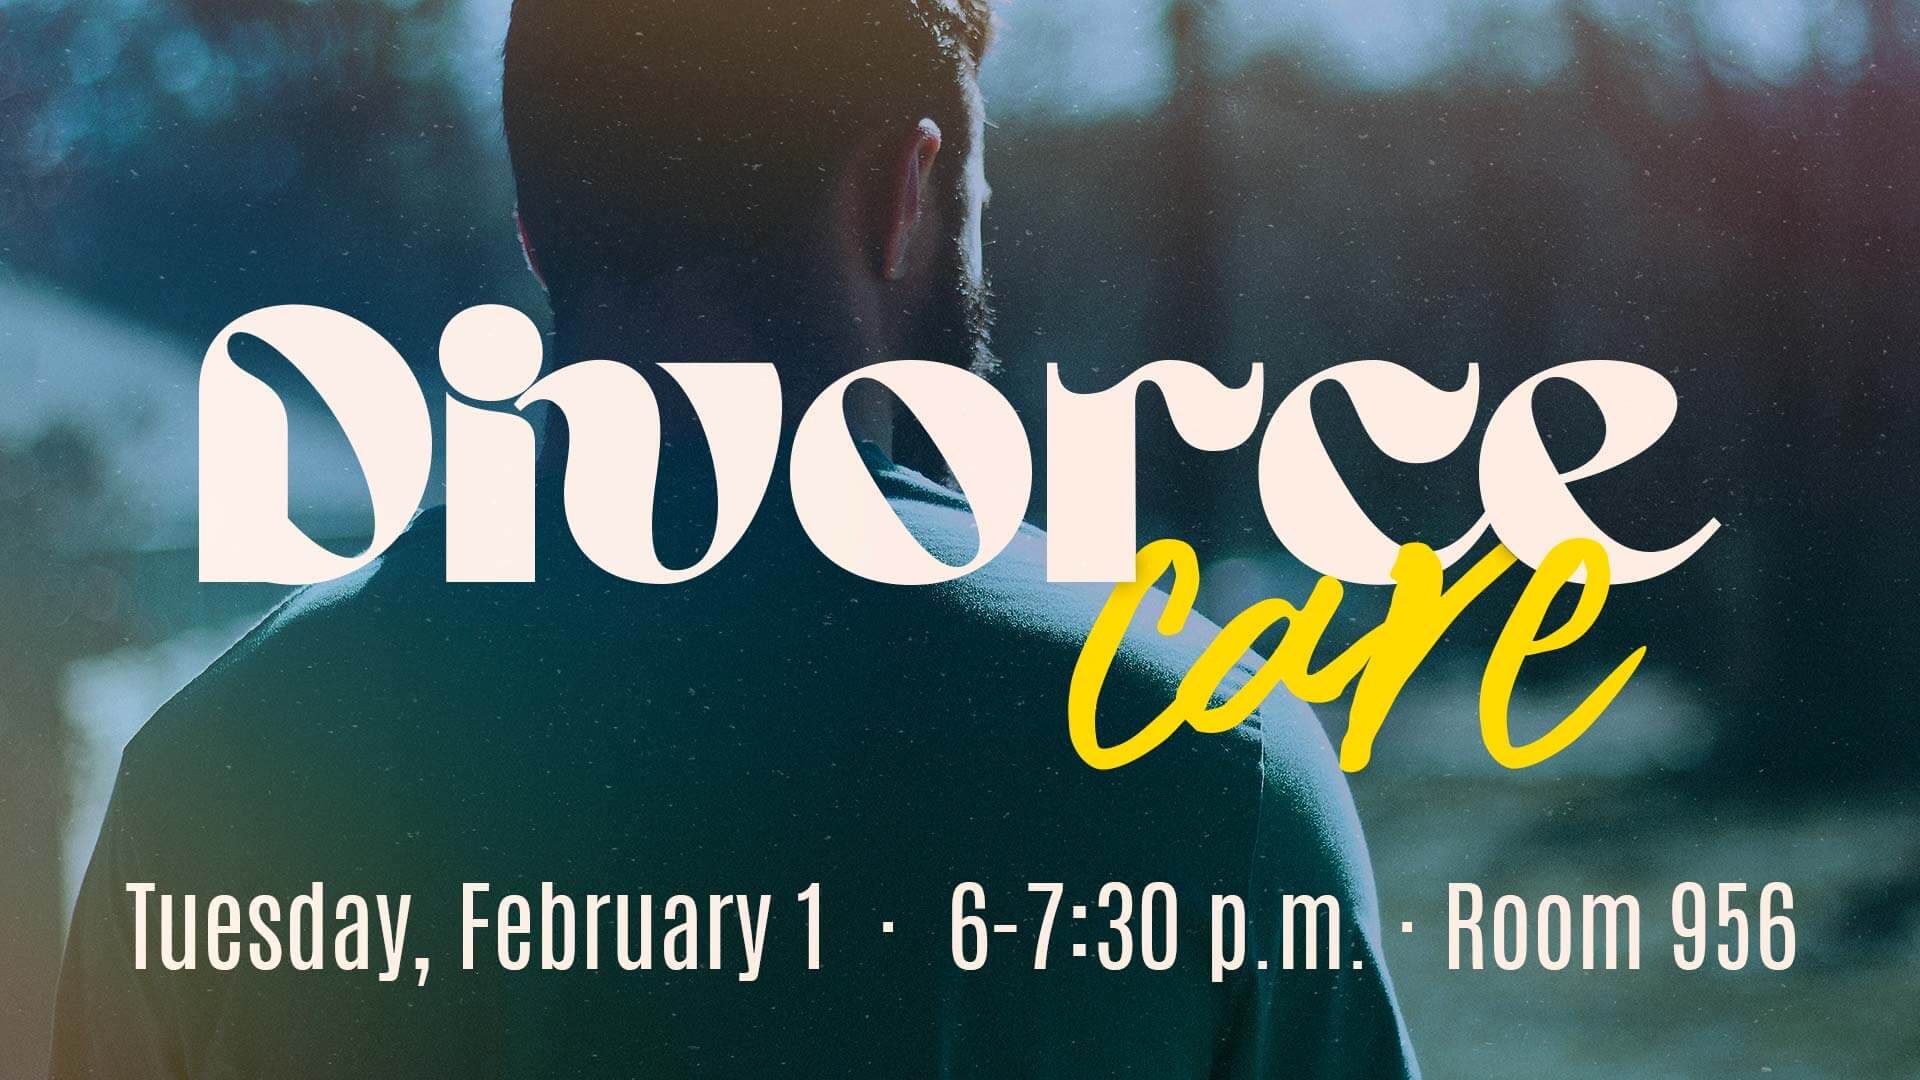 DivorceCare: Tuesday, February 1 from 6-7:30 pm. in Room 956